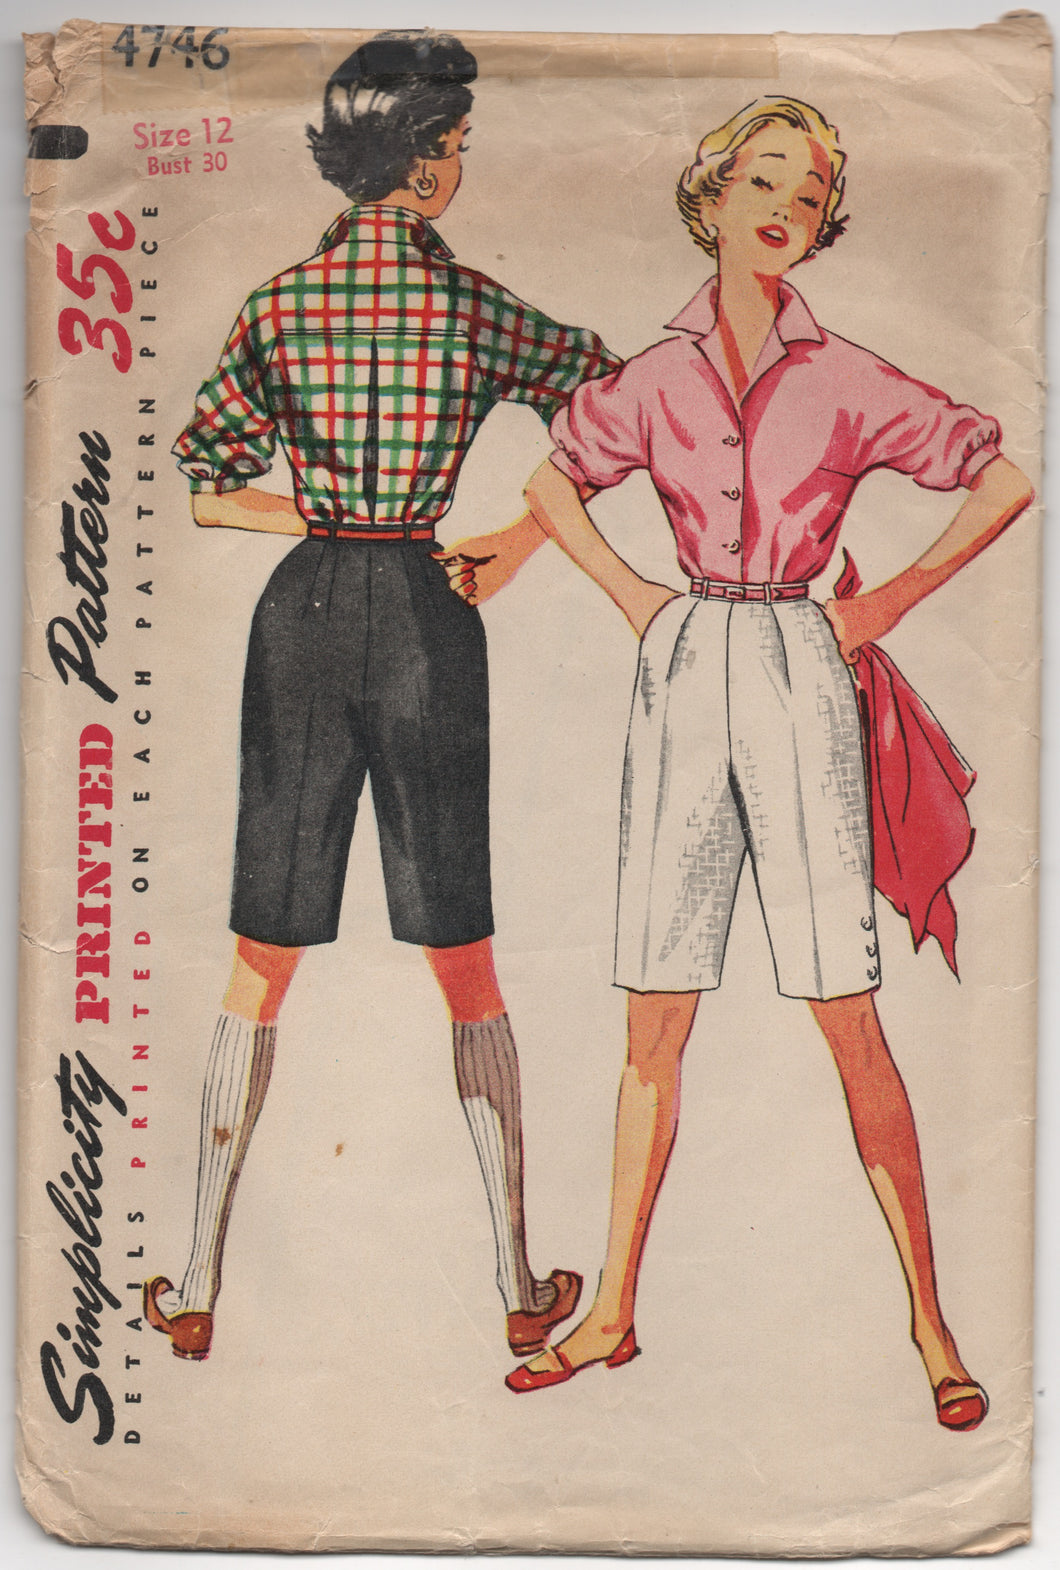 1950's Simplicity Button-Up Blouse with Elbow Length Sleeves and High Waisted Shorts Pattern - Bust 30